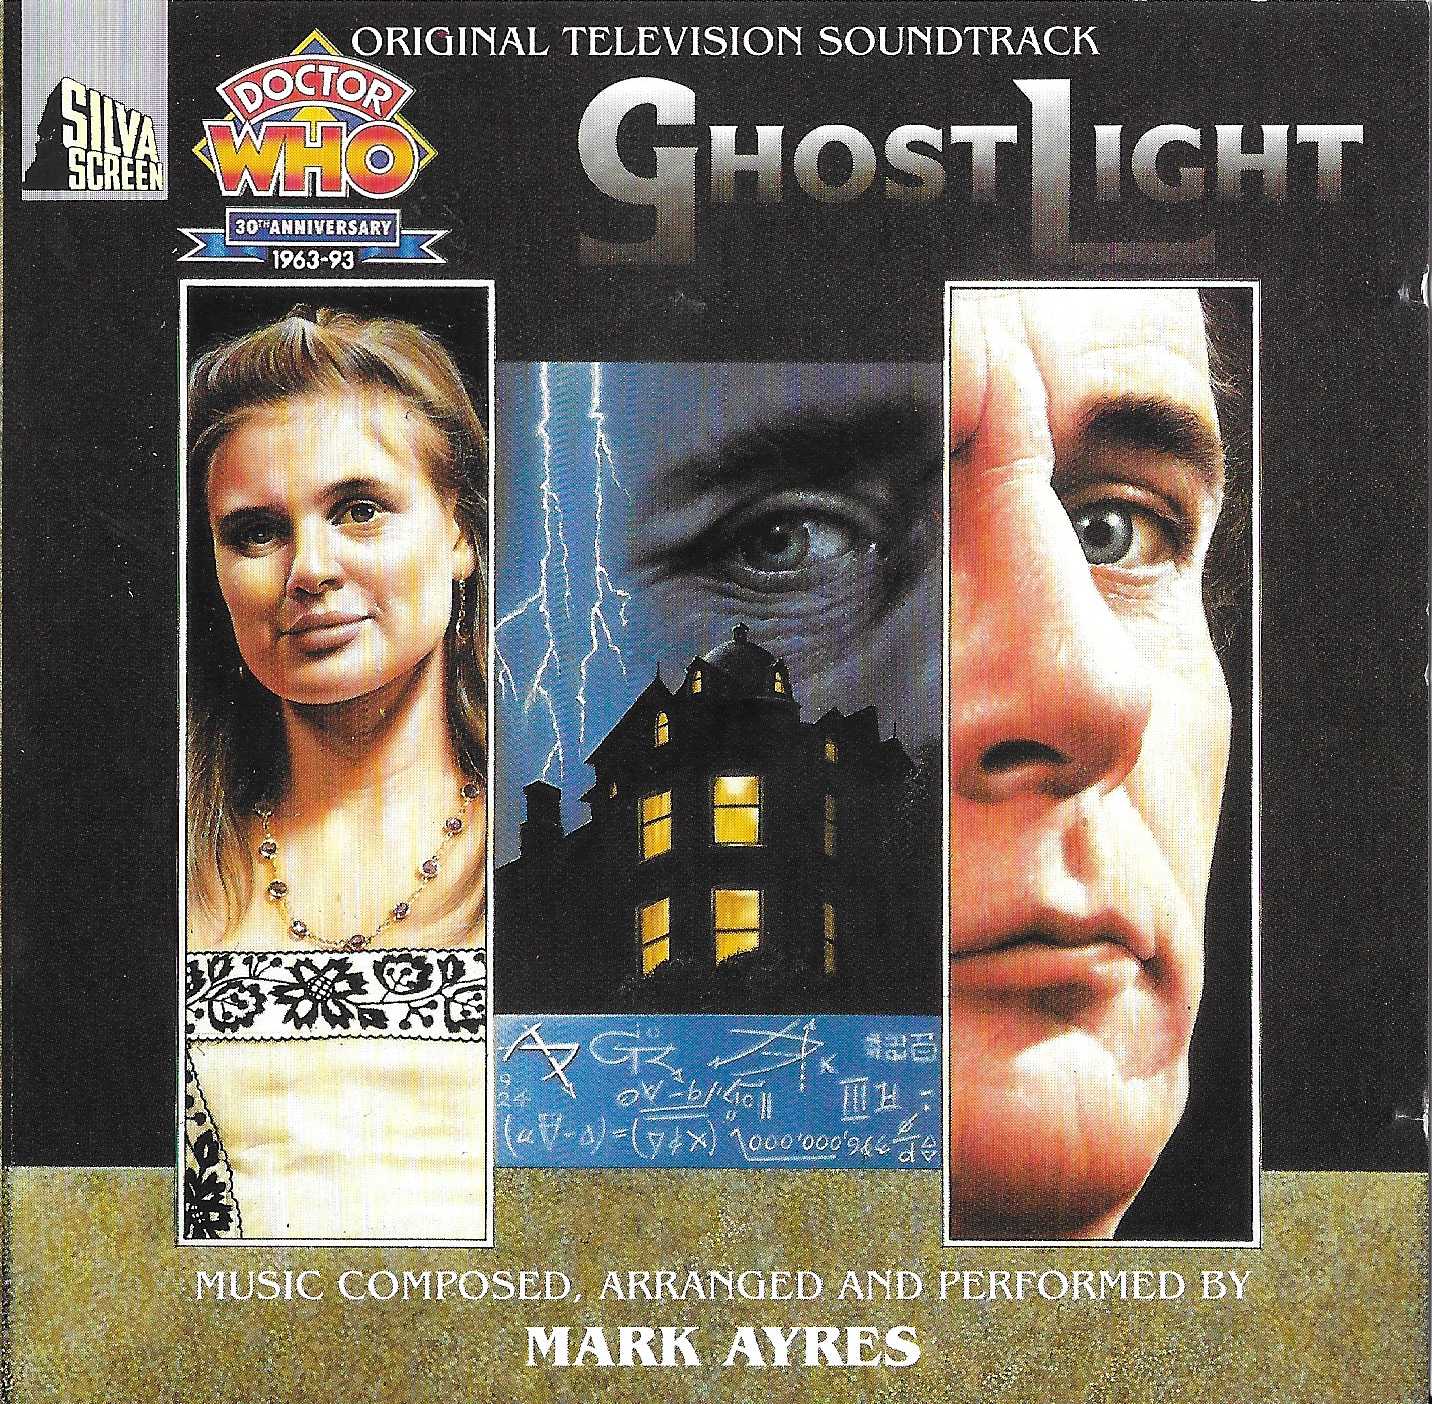 Picture of FILMCD 133 Doctor Who - Ghostlight by artist Mark Ayres from the BBC records and Tapes library